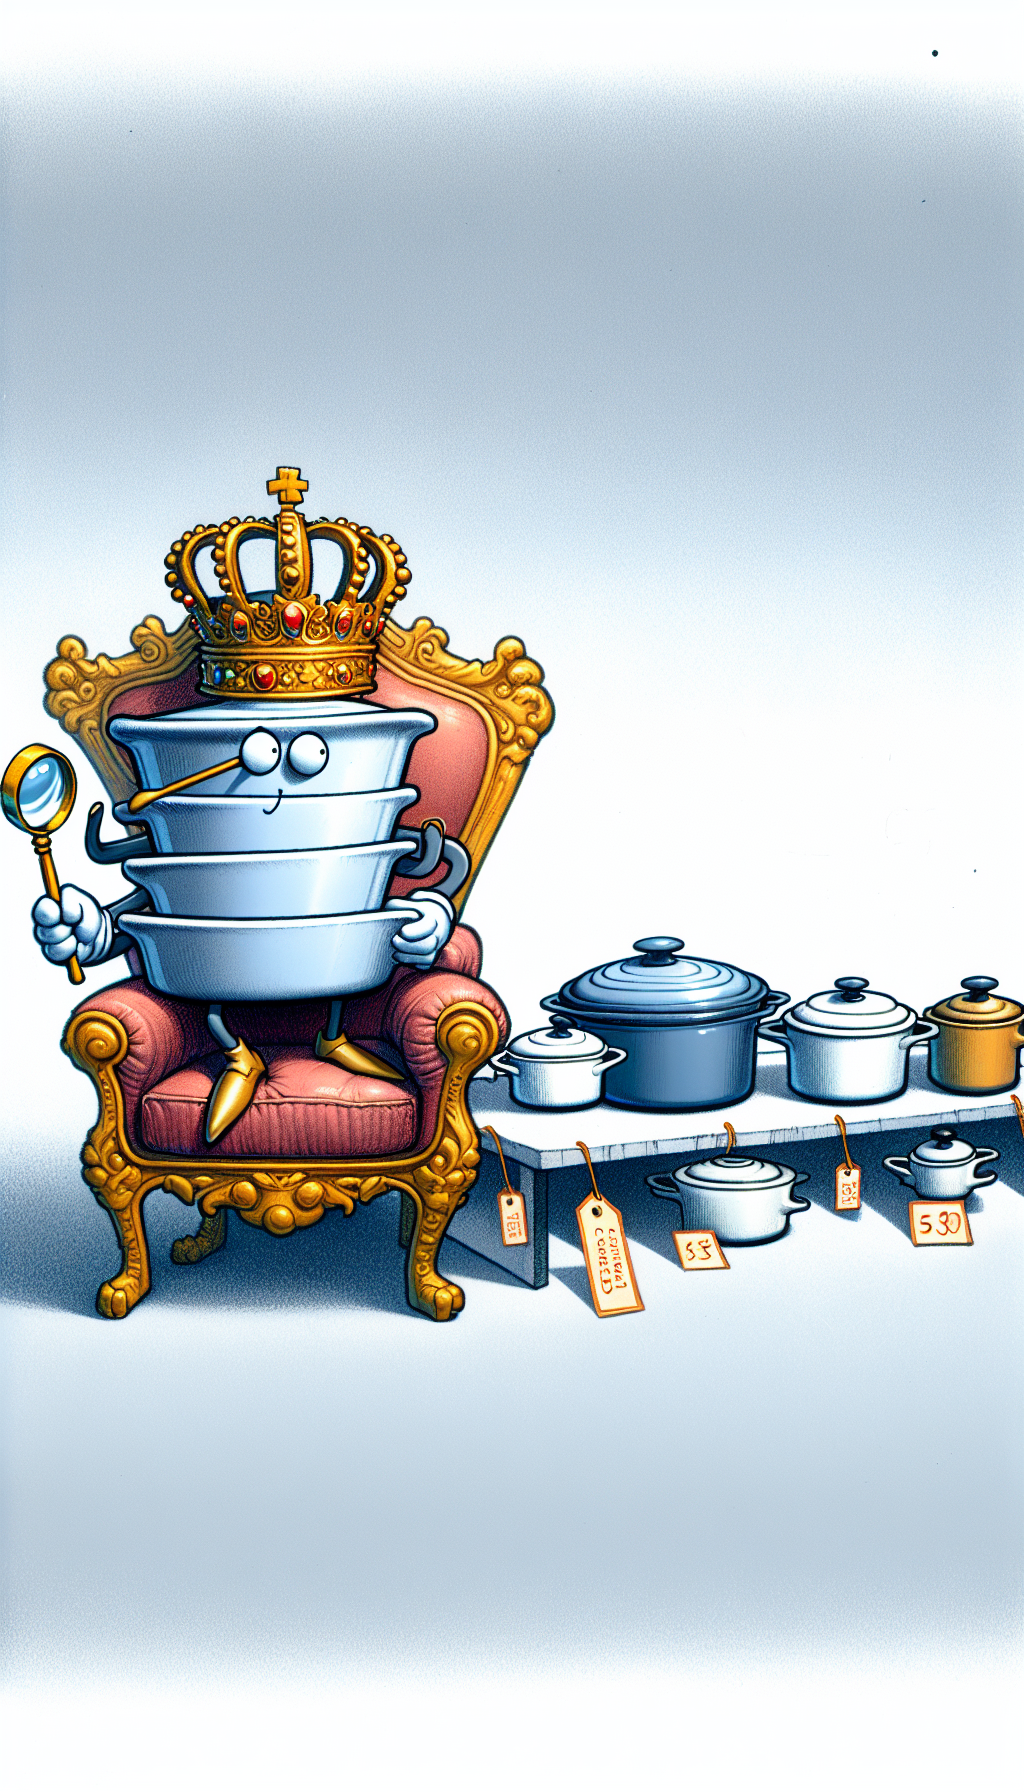 A regal, cartoon-styled anthropomorphic piece of CorningWare adorned with a golden crown and scepter sits atop a throne, inspecting a line of various aged CorningWare pieces with a jeweler's loupe. A subtle price tag hangs from the throne, hinting at high value, while the cookware queue demonstrates a spectrum from pristine to chipped, showcasing the significance of condition in evaluating worth.